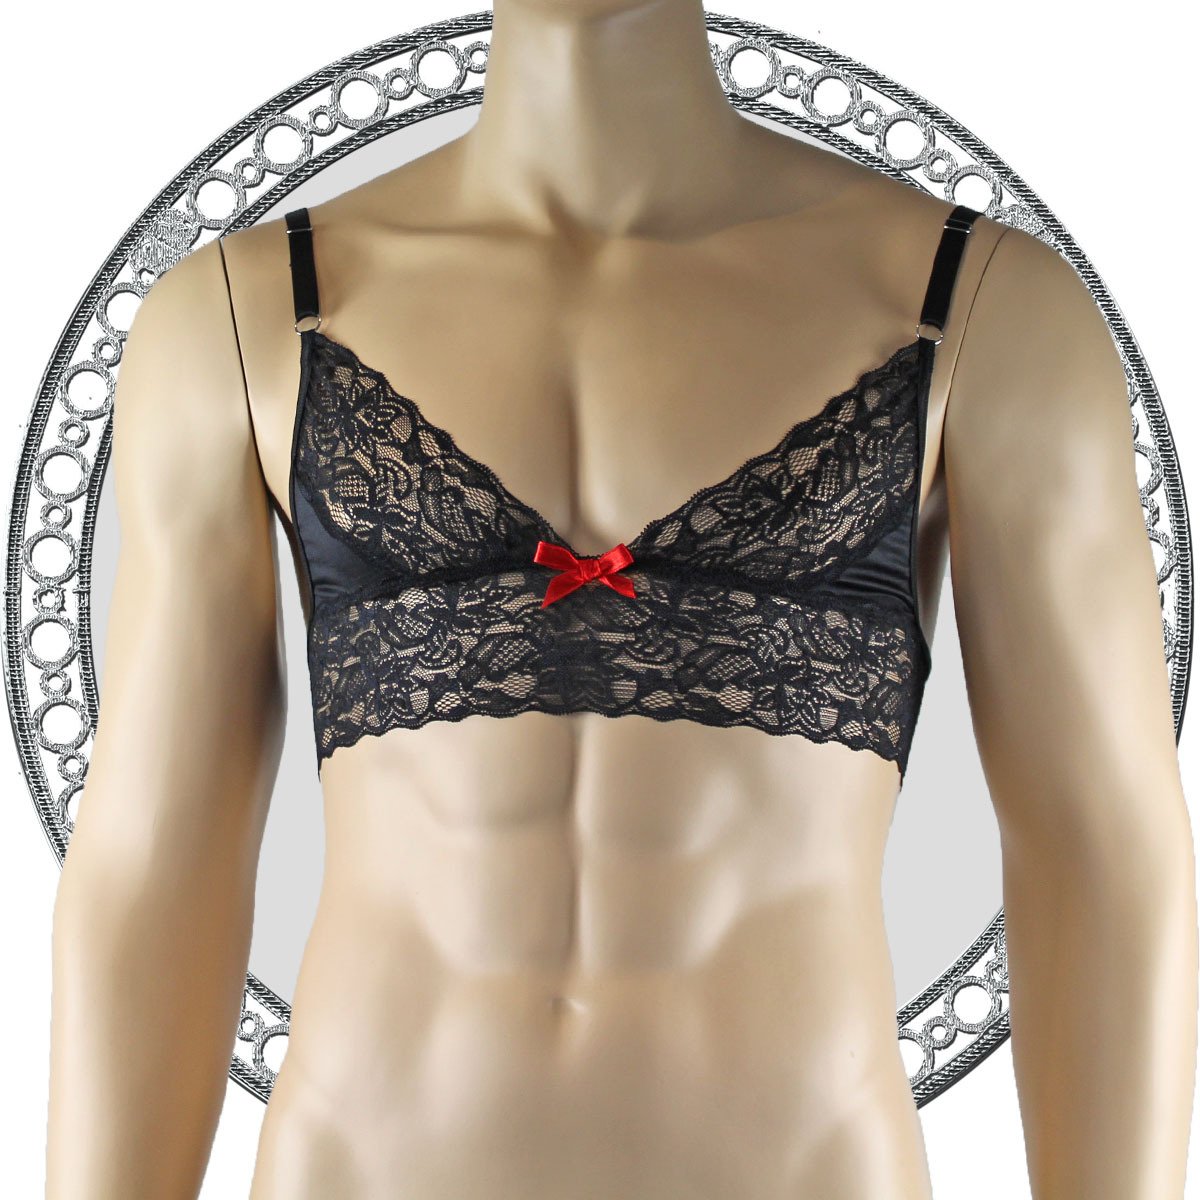 Mens Joanne Lace Bra Top Lingerie and Thong for Men Black and Black Lace